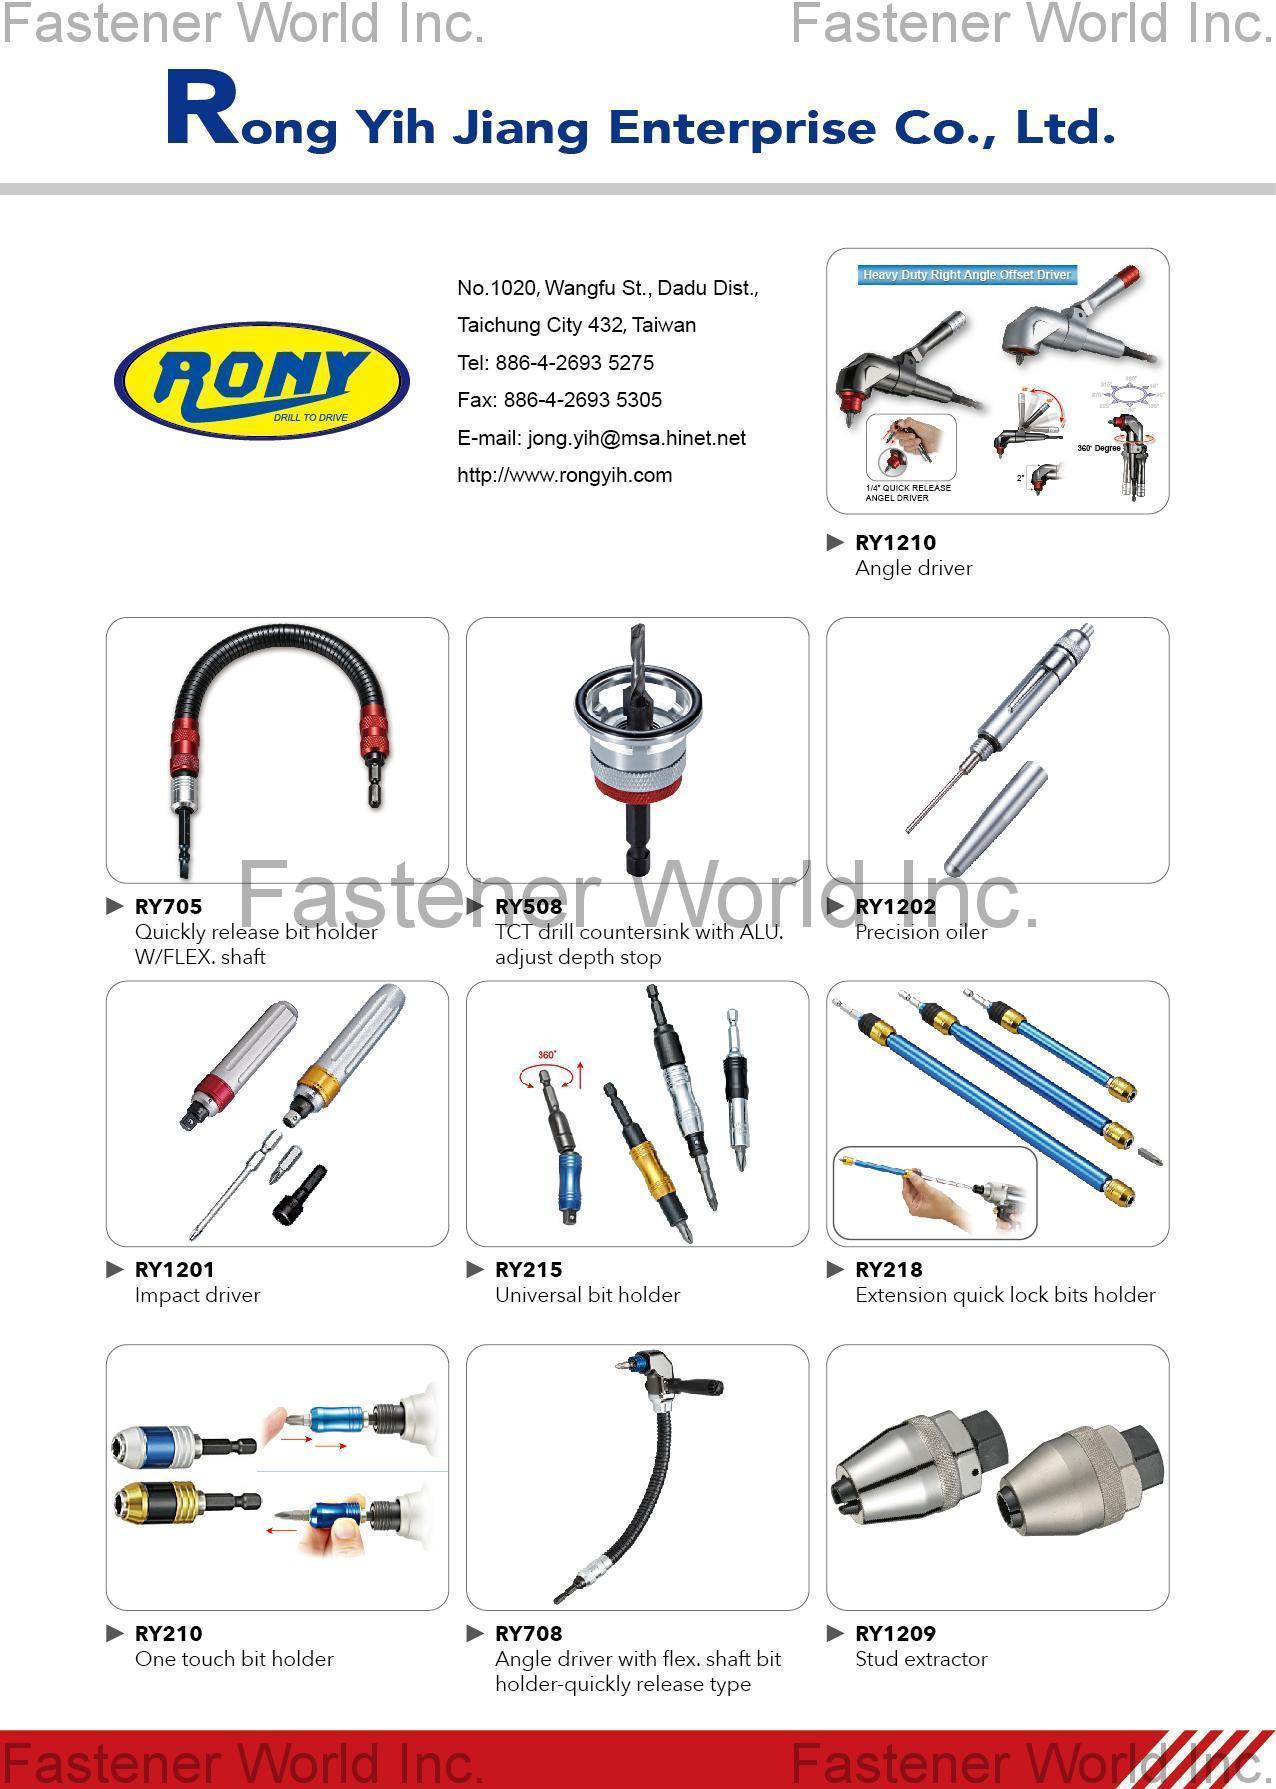 RONG YIH JIANG ENTERPRISE CO., LTD. , Angle Drive, Shaft, Precision Oiler, Impact Drive, Universal bit holder, Extension Quick Lock Bits Holder, One Touch Bit Holder, Stud Extractor , Socket Bits